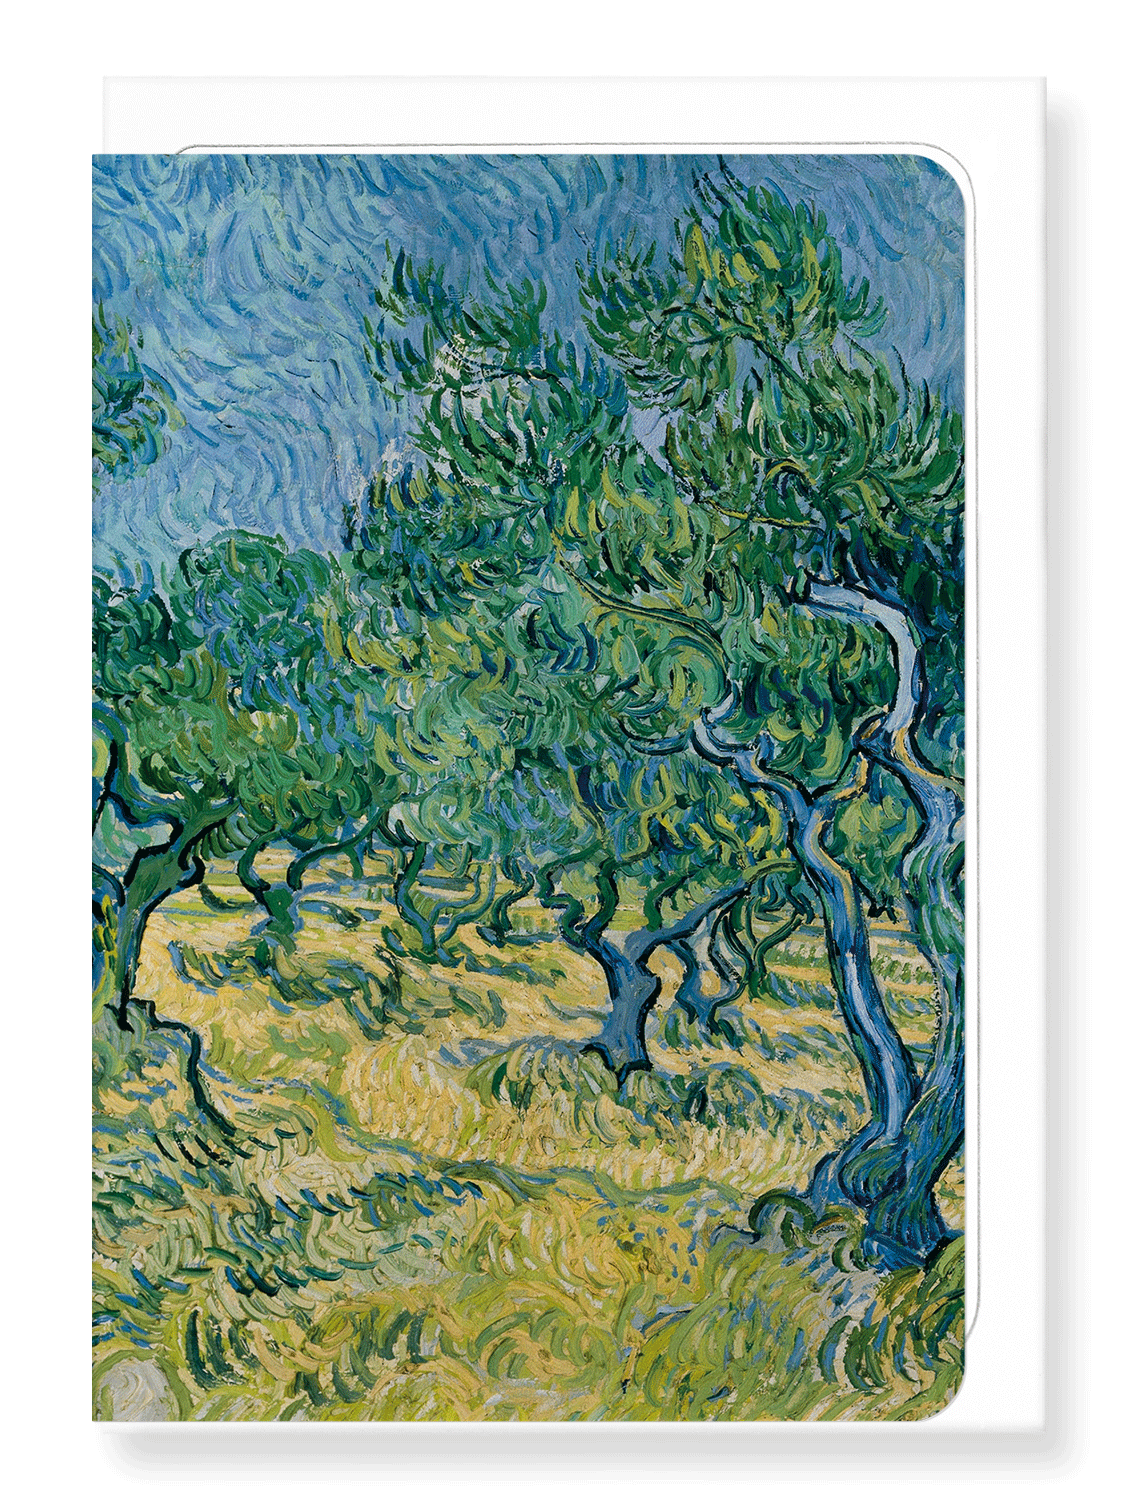 Ezen Designs - Olive grove (1889) - Greeting Card - Front